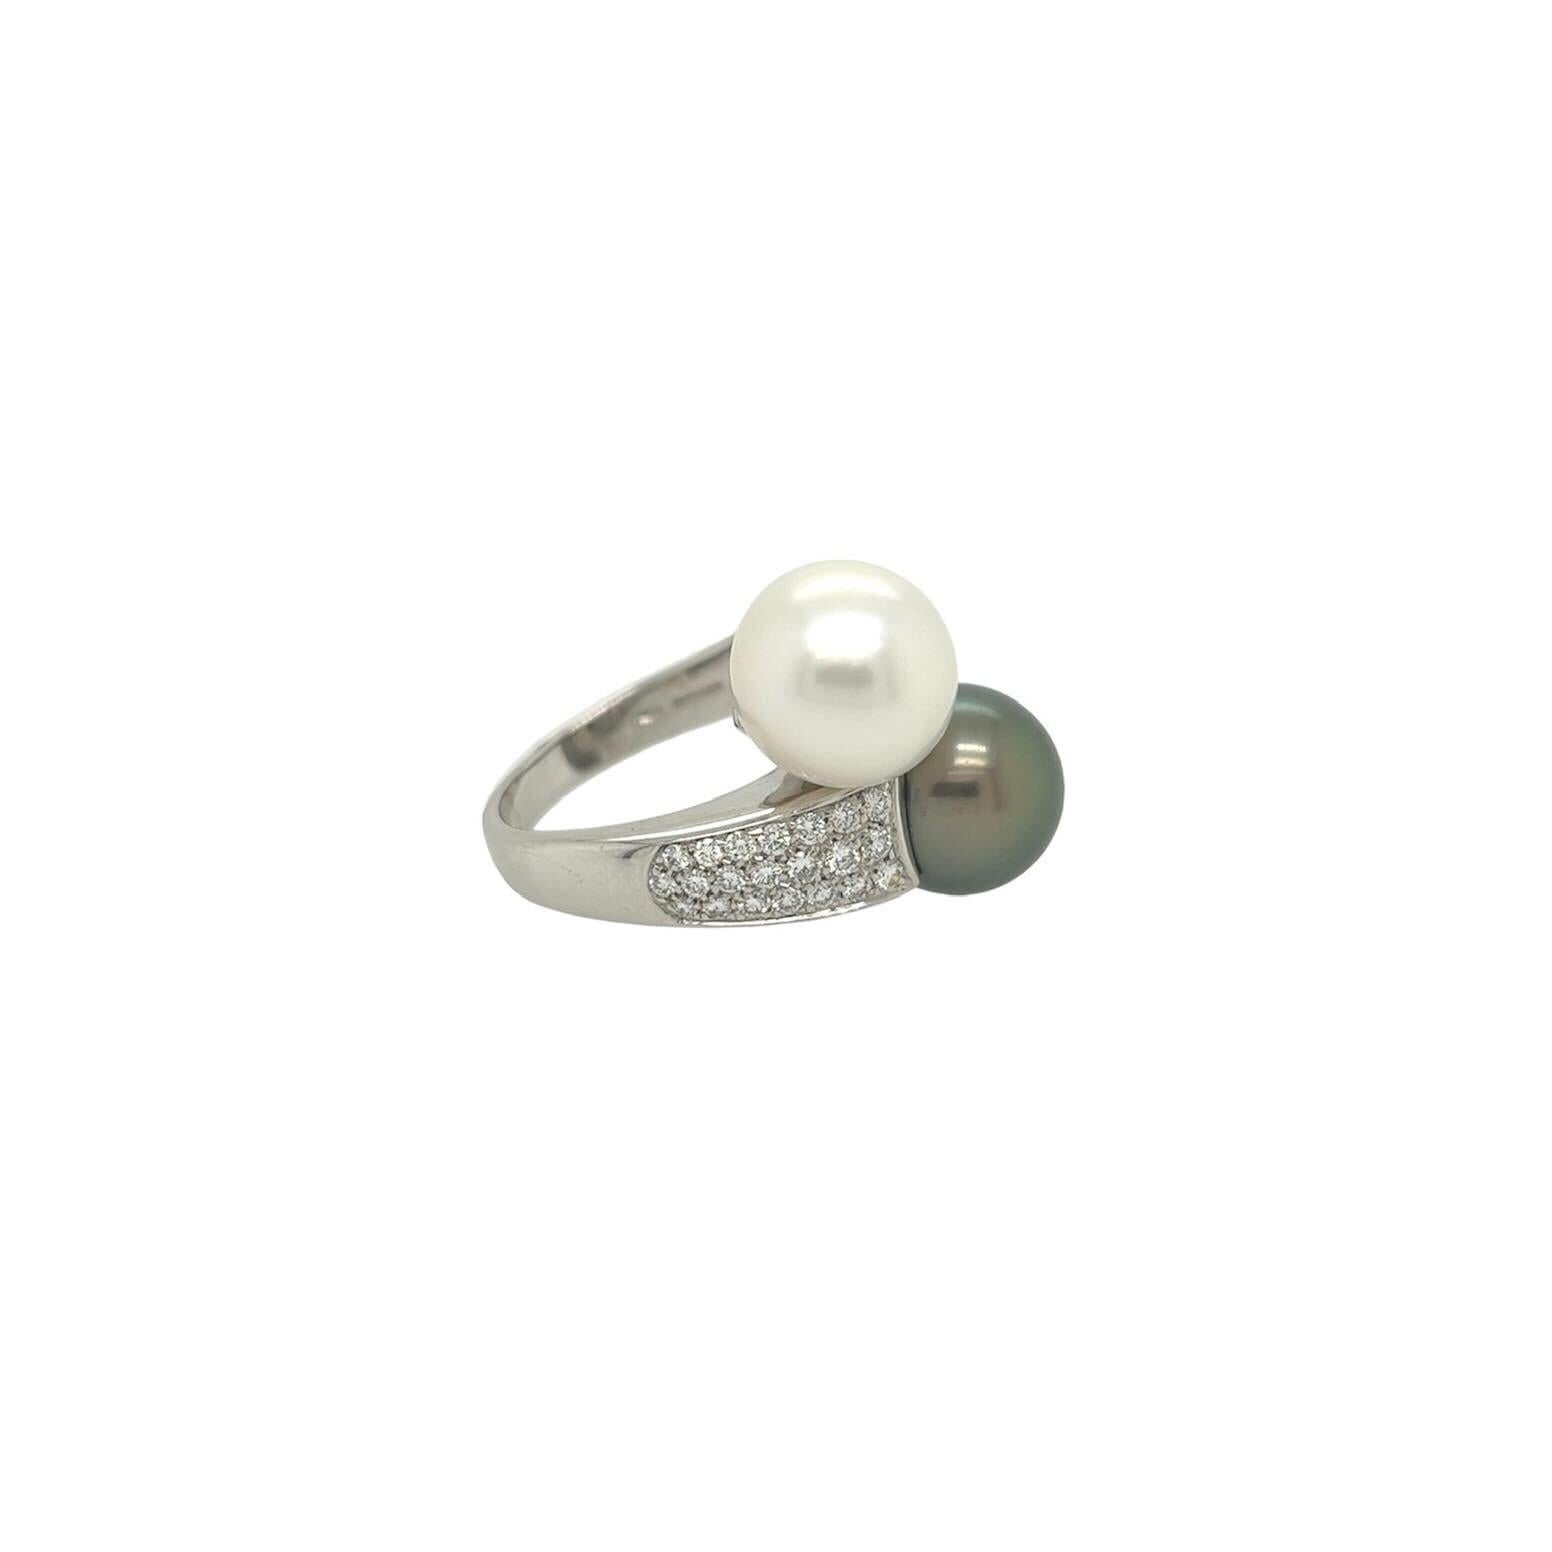 An 18 karat white gold, South Sea pearl and diamond ring, Boucheron. Designed in 